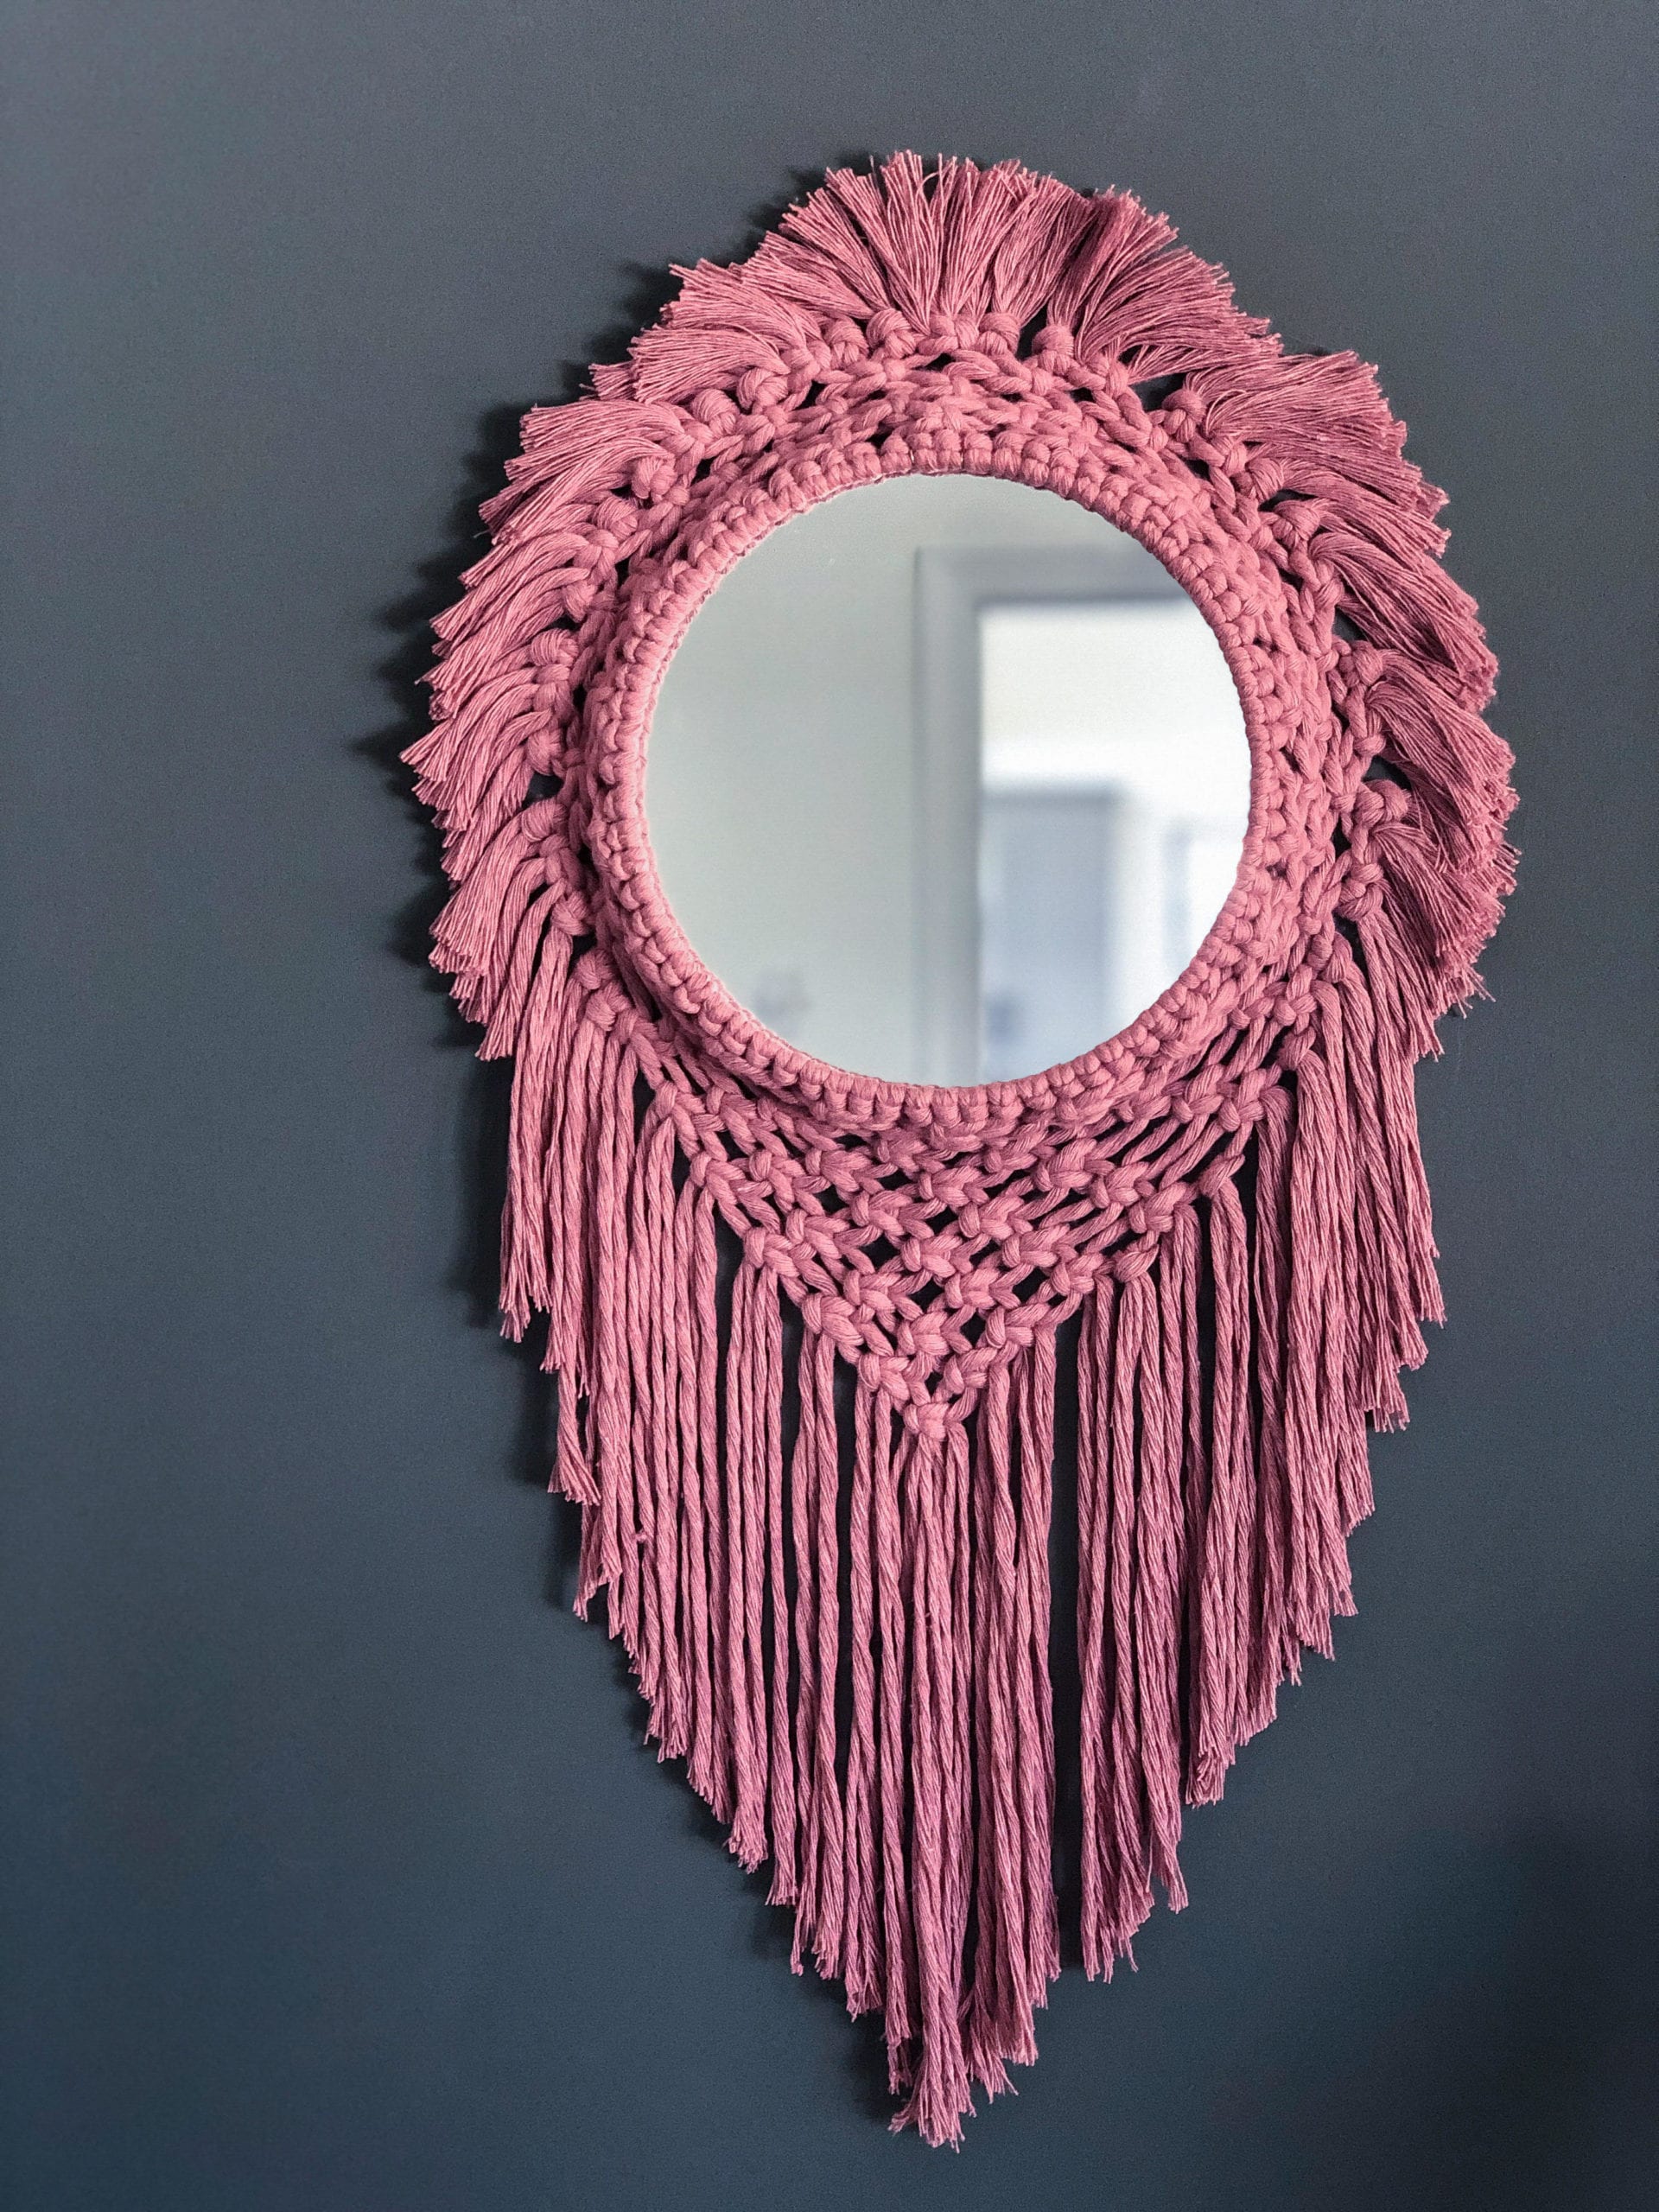 Mirror Art from Woven+Tied